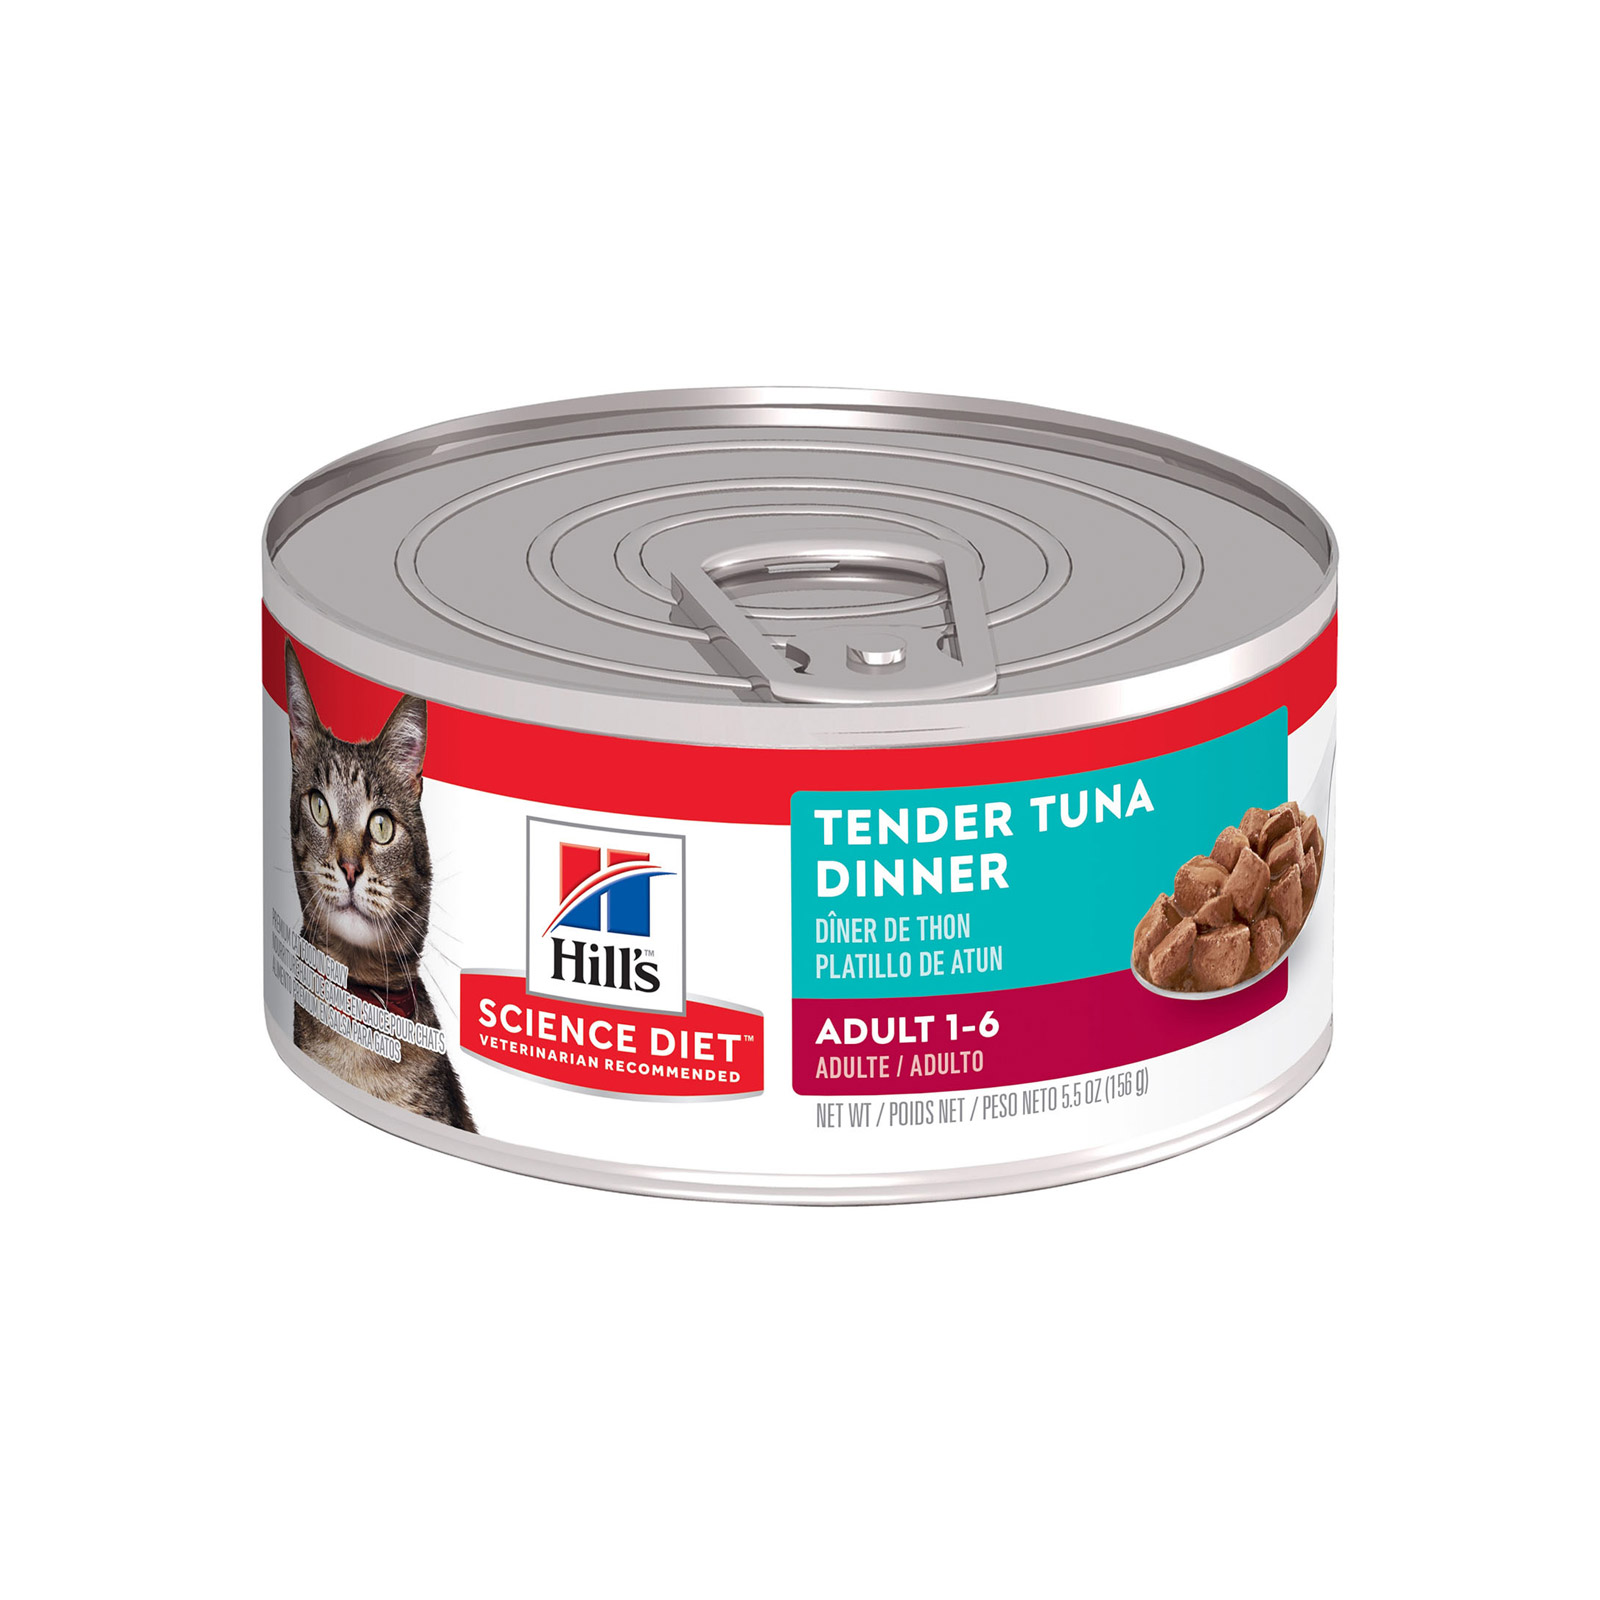 Hill's Science Diet Adult Tender Tuna Dinner Canned Wet Cat Food for Food